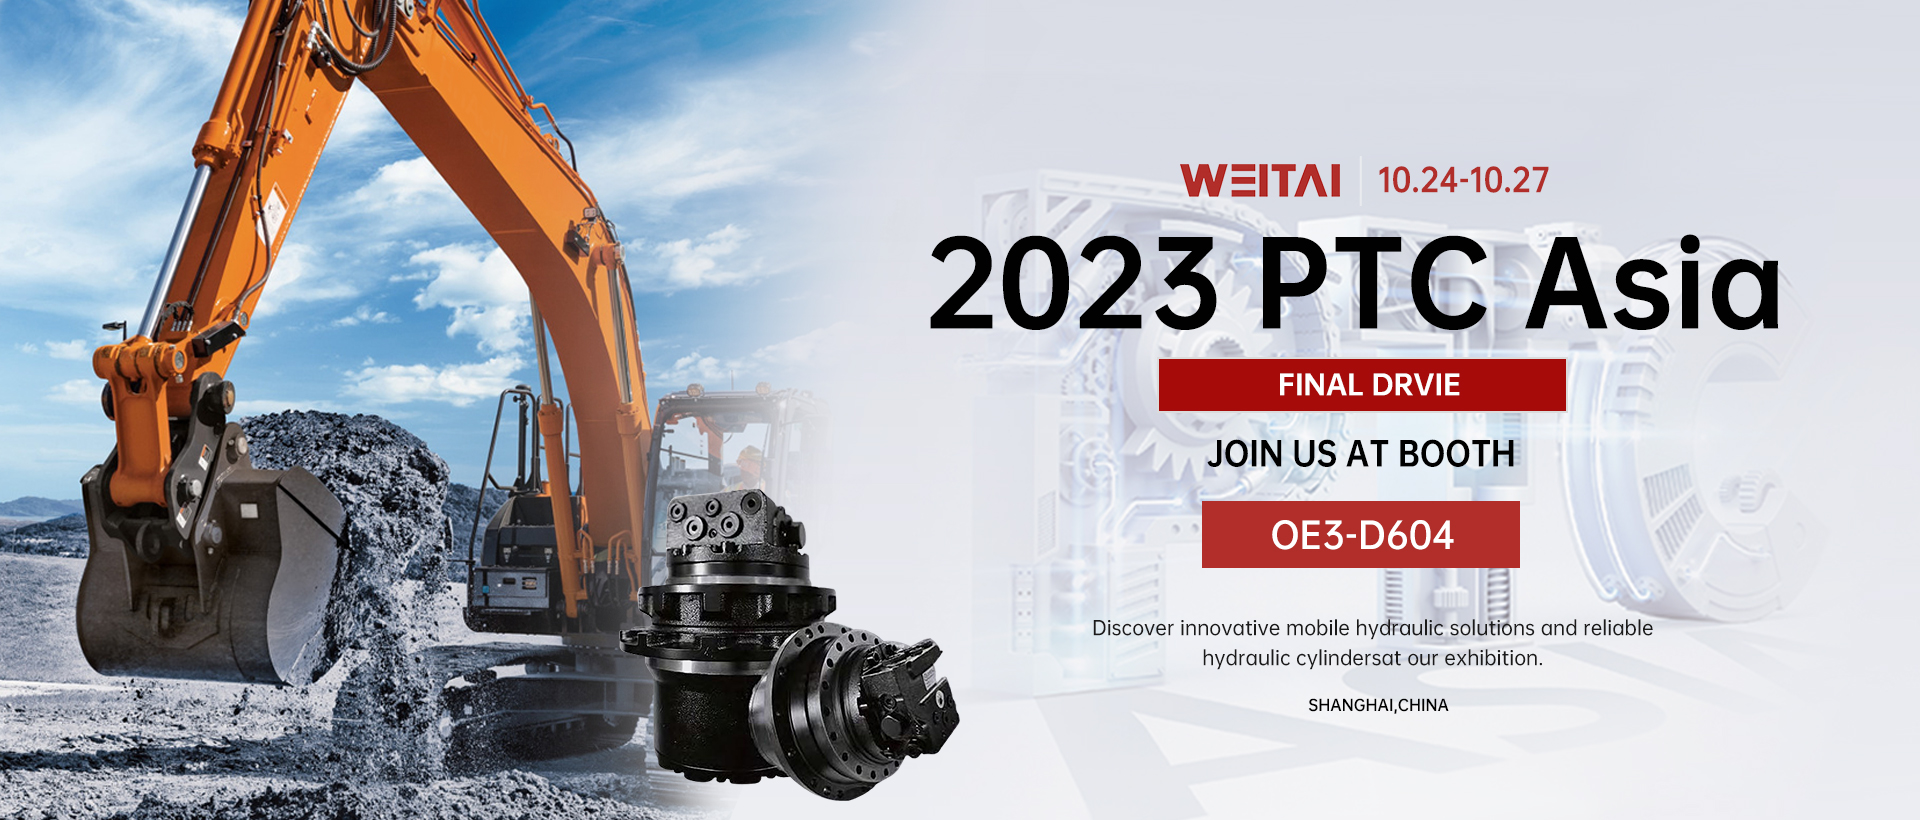 Powering Your Machinery: Discover WEITAI Final Drive at PTC Asia 2023!